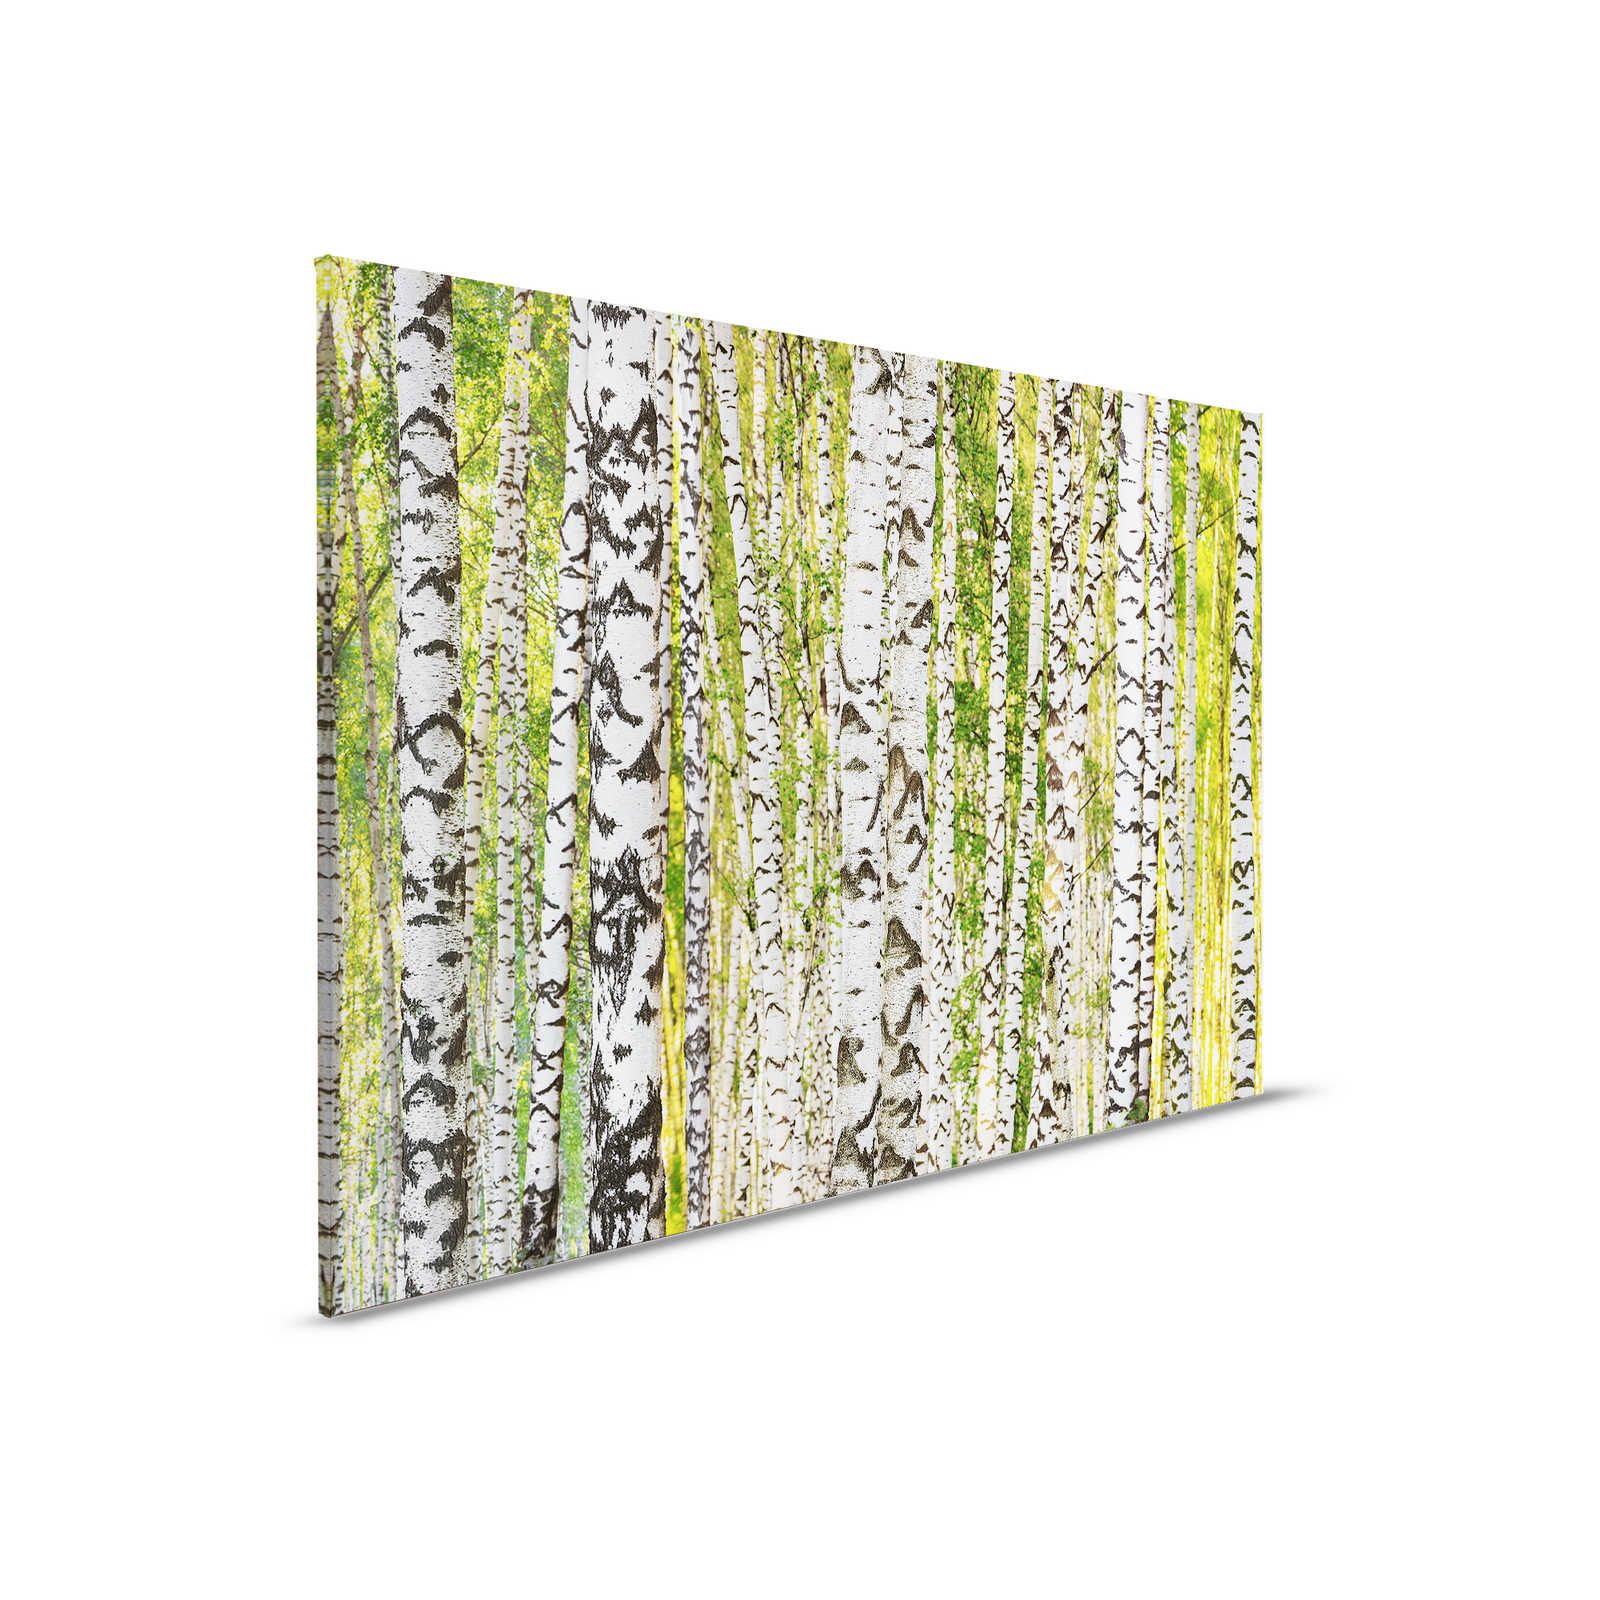         Birch Forest Canvas Painting Tree Trunk Motif - 0.90 m x 0.60 m
    